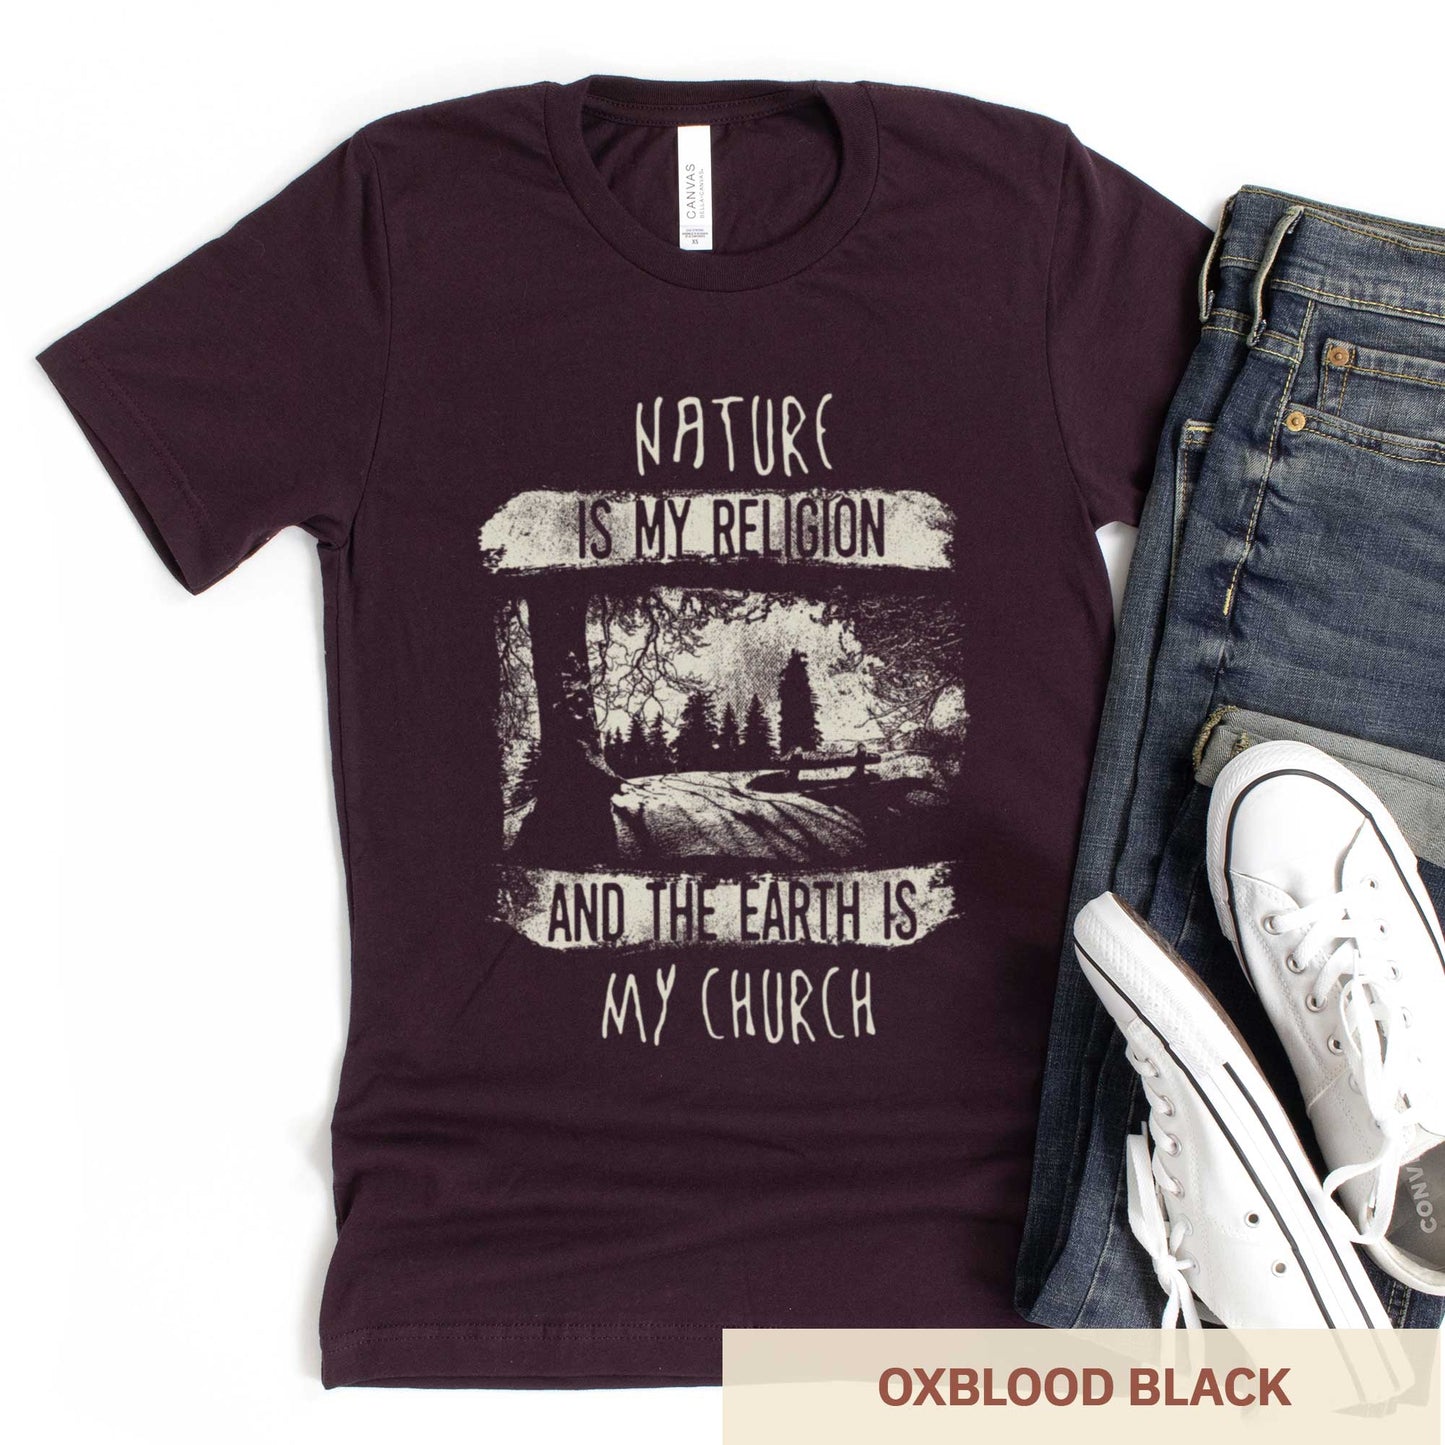 An oxblood black Bella Canvas t-shirt featuring fields and a forest with the words nature is my religion and the earth is my church.